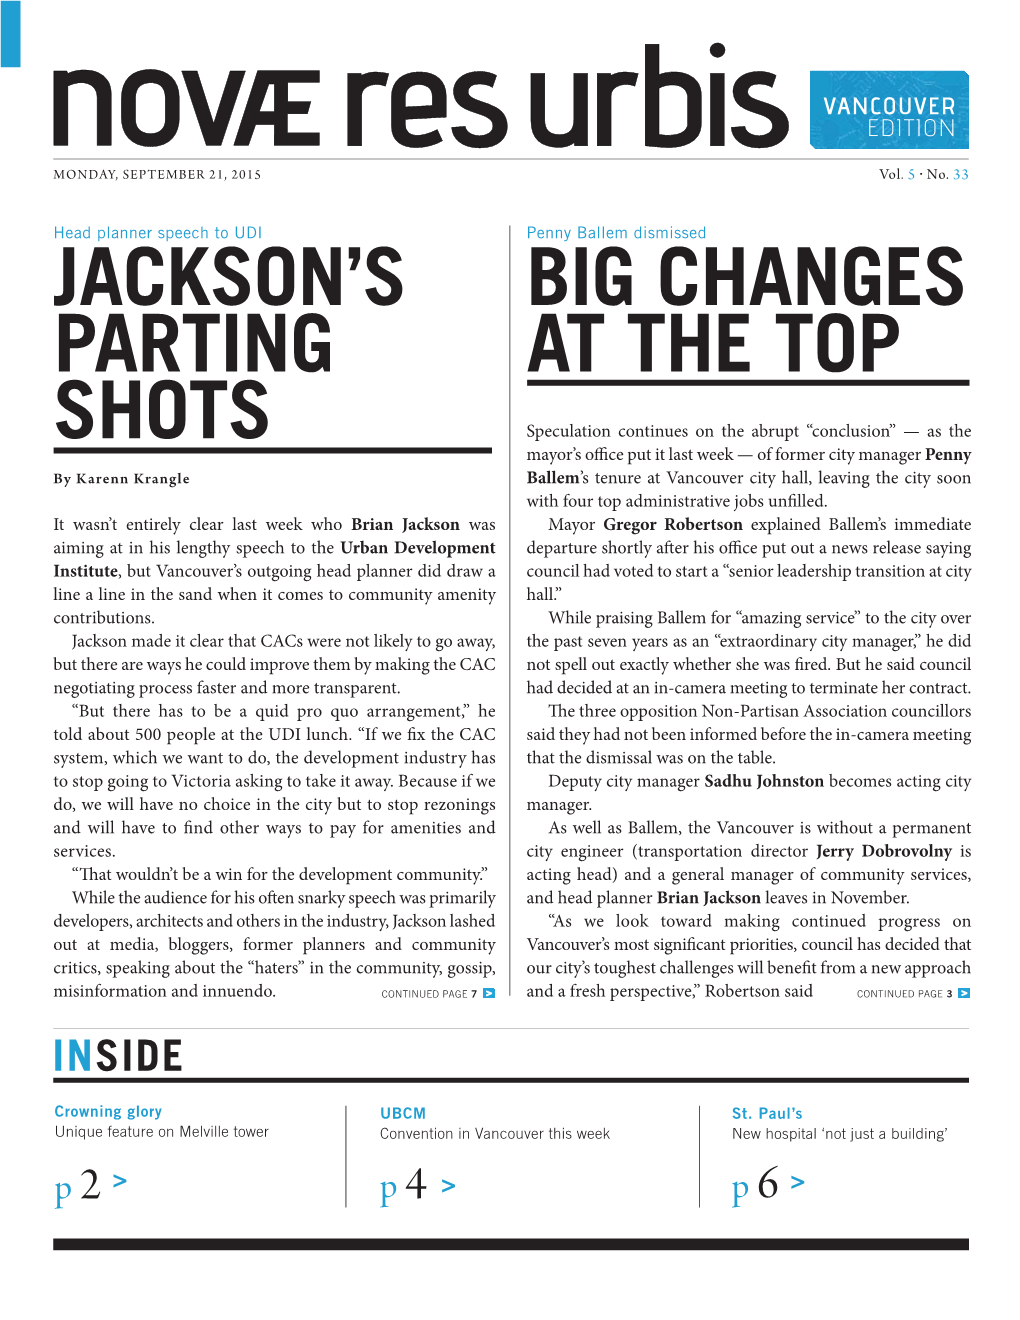 Jackson's Parting Shots Big Changes at The